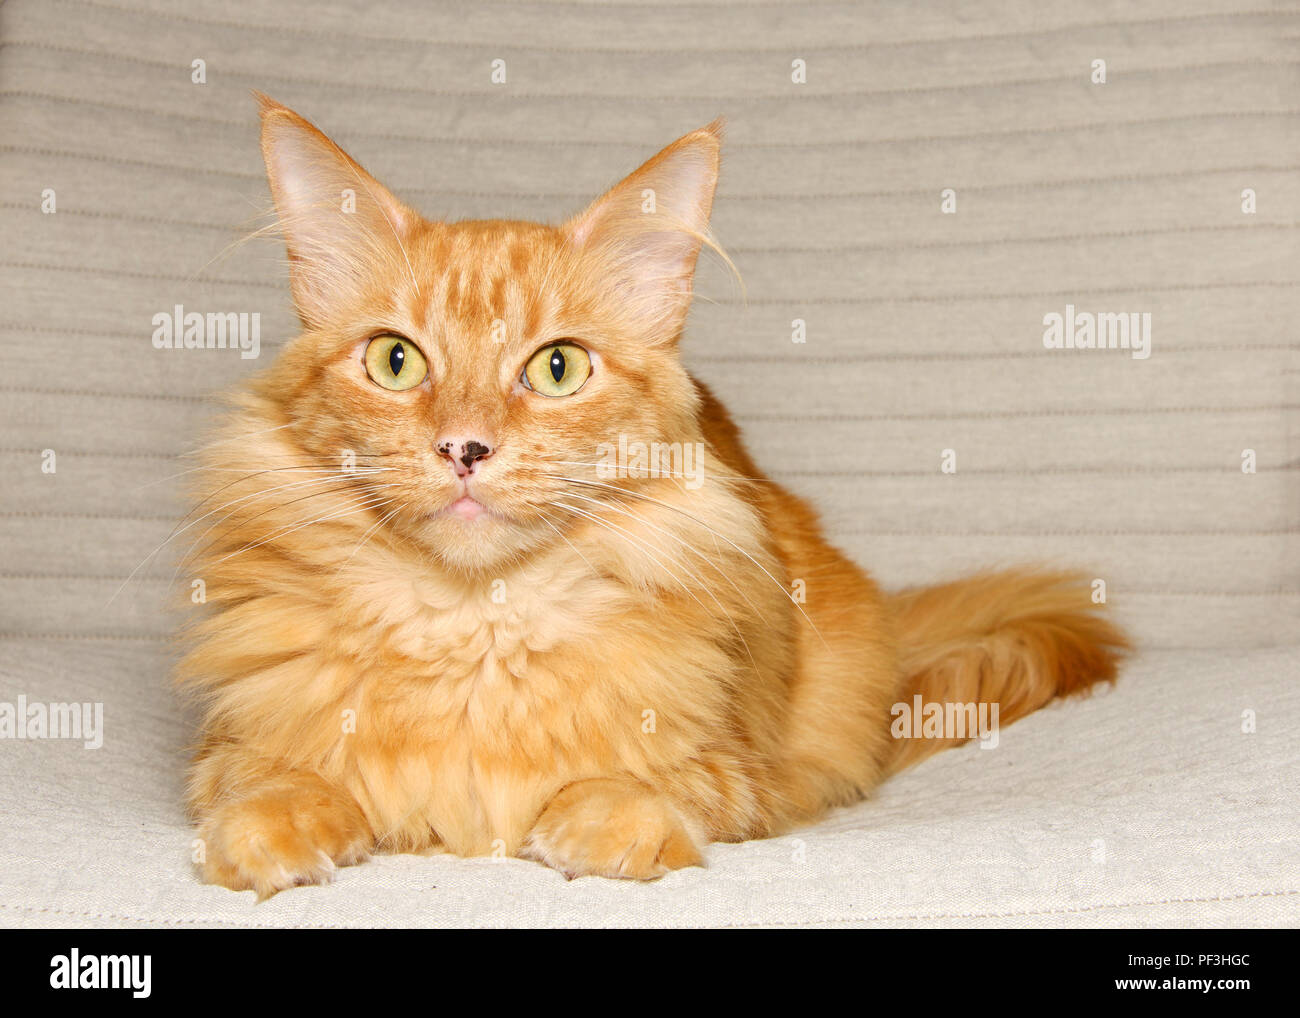 Long haired orange tabby cat laying on a textured fabric chair looking directly at viewer with wide eyes. Adorable small kitty. Copy space. Stock Photo